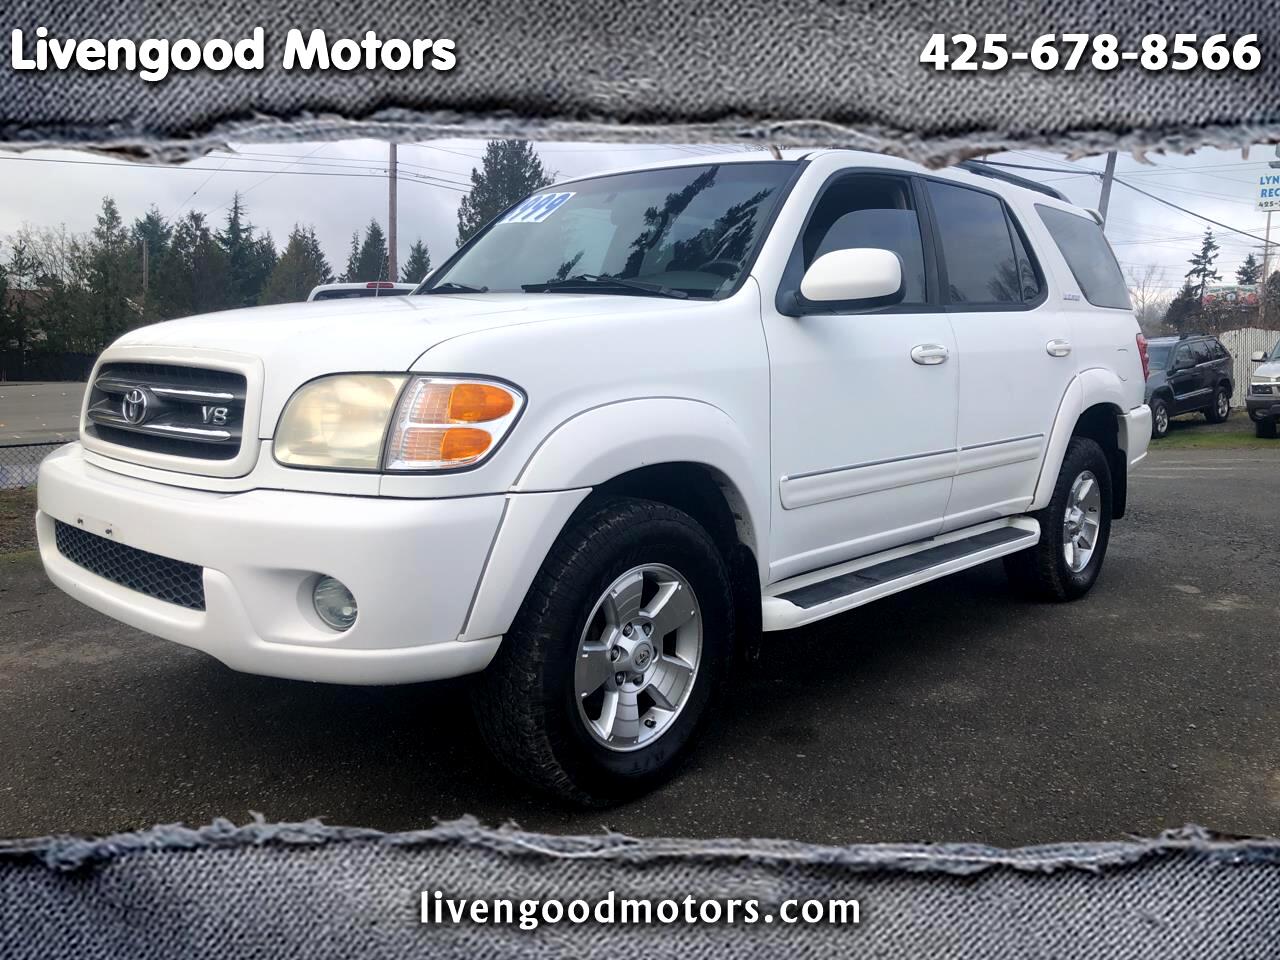 Toyota Sequoia 4dr Limited 4WD (Natl) 2004